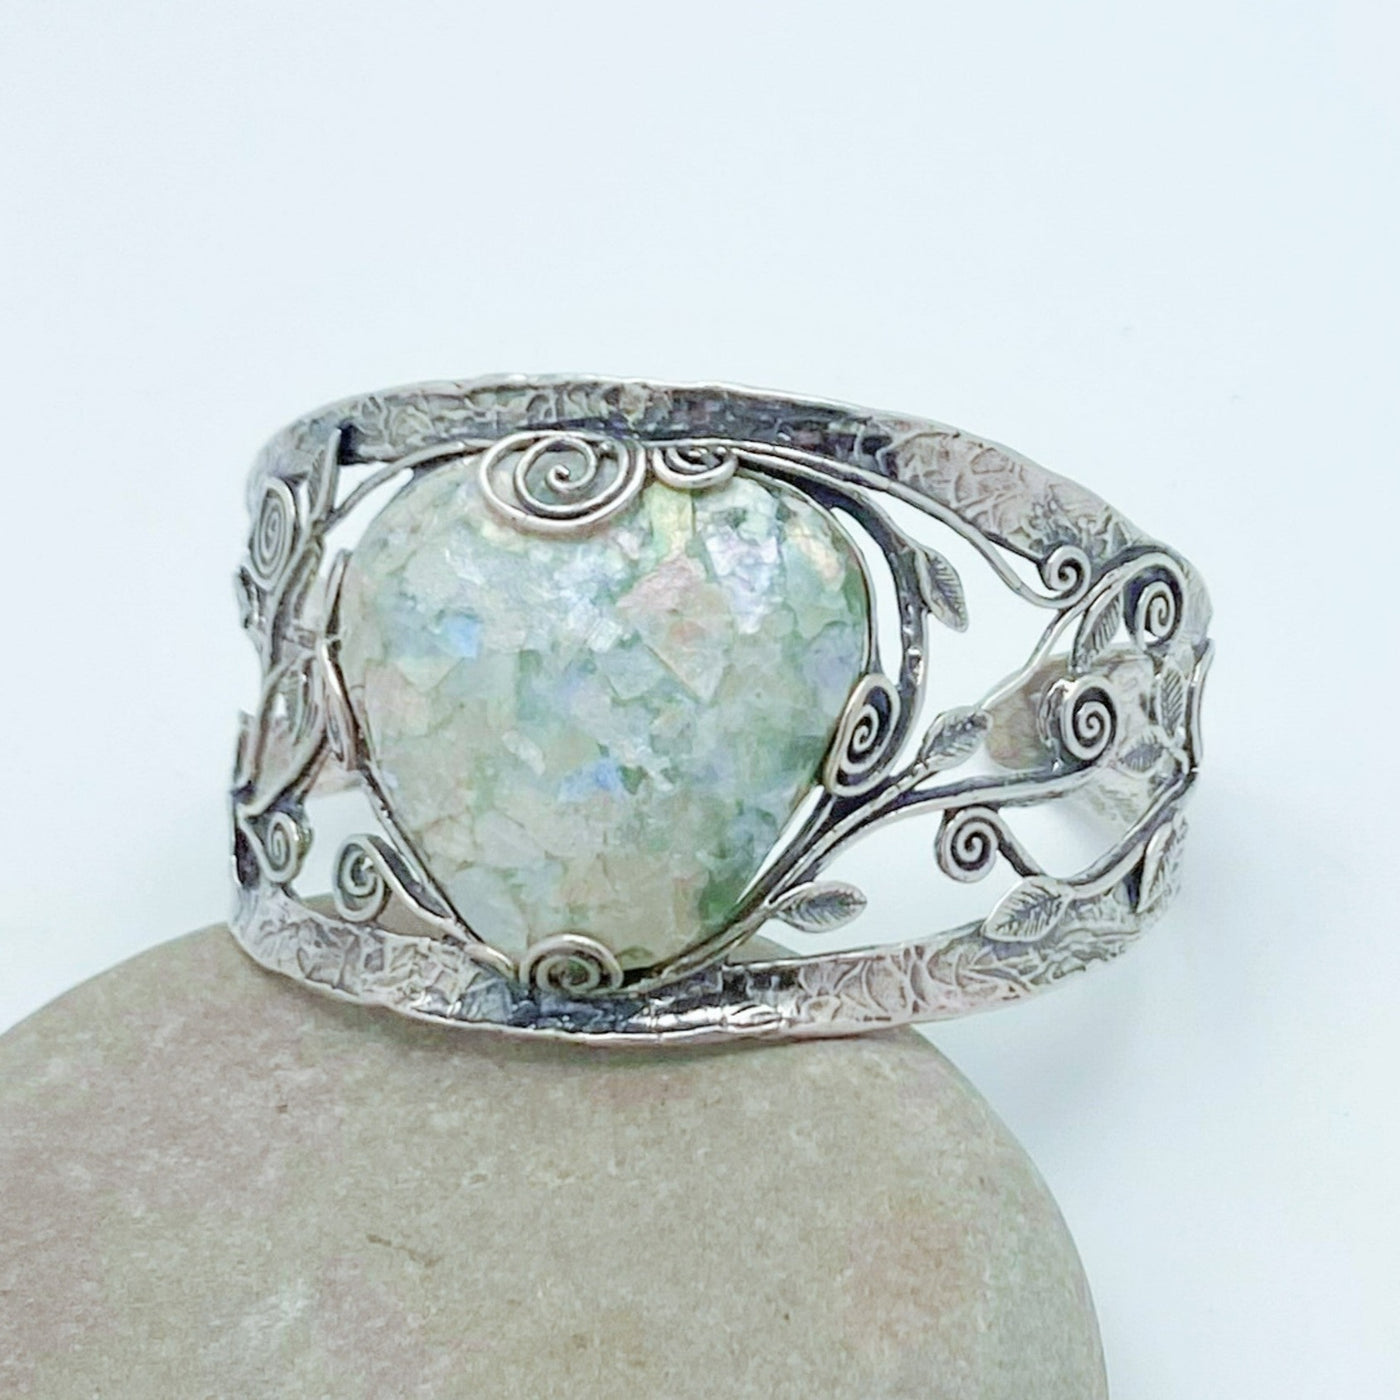 Large triangle shaped piece of Roman Glass set in a 925 Sterling Silver cuff bracelet - The band is adorned with vines and leaves and has a unique hammered appearance.